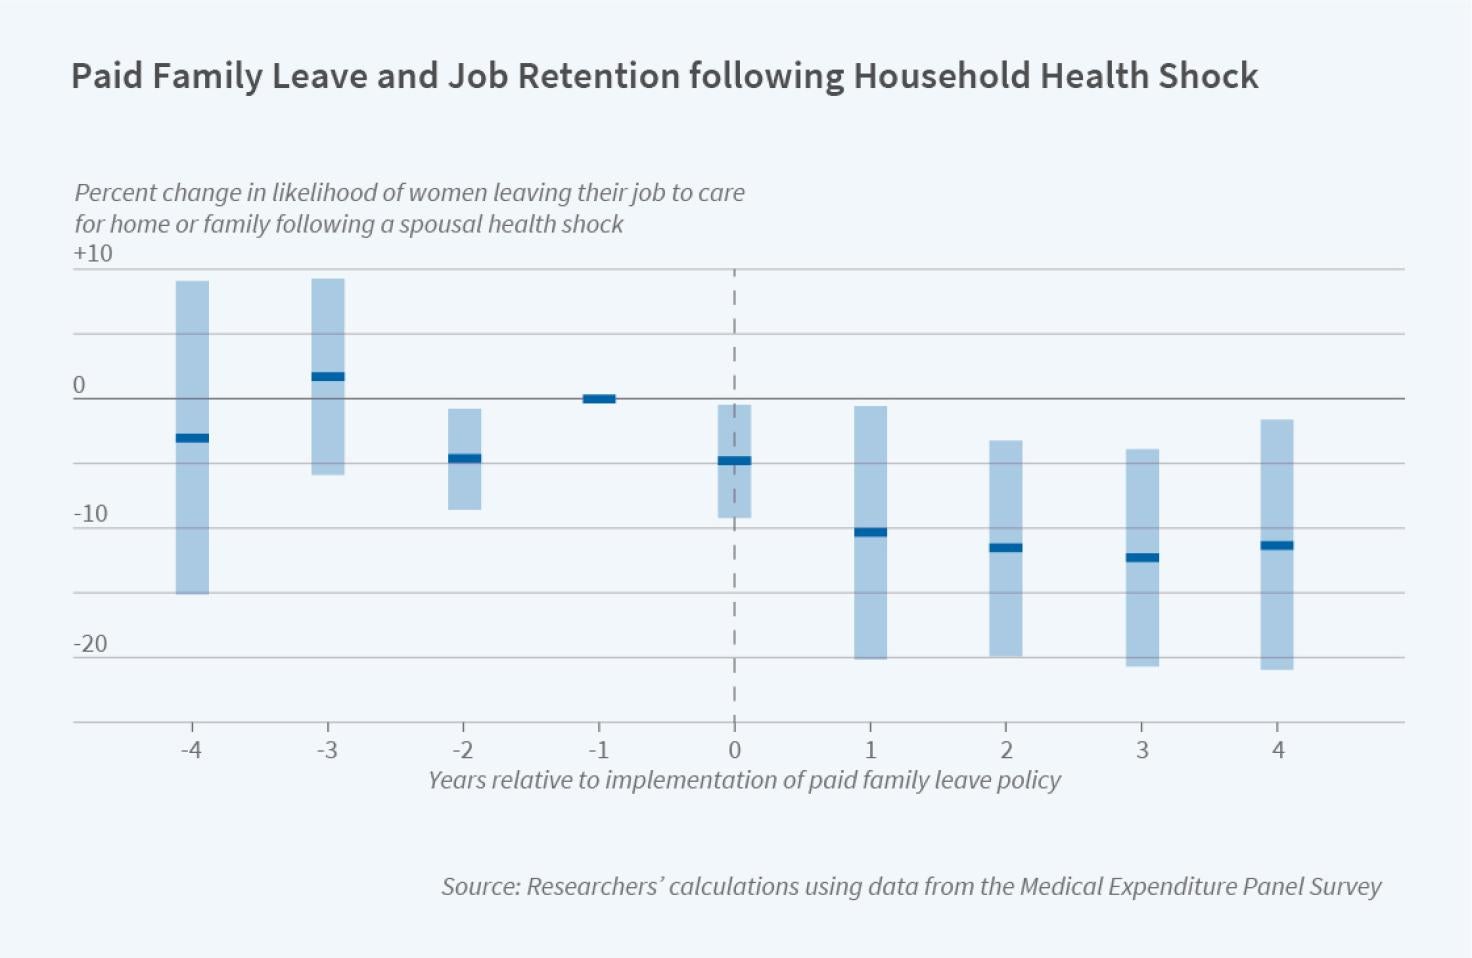 The figure is an event-study chart titled, "Paid Family Leave and Job Retention following Household Health Shock."  The y-axis, which ranges from -25 to 10 percentage points, shows the change in likelihood of women leaving their job to care for home or family following a spousal health shock, relative to the year before implementation.  In the years following implementation, the probability declines by about 10 percentage points.  Source: Researchers’ calculations using data from the Medical Expenditure Pan